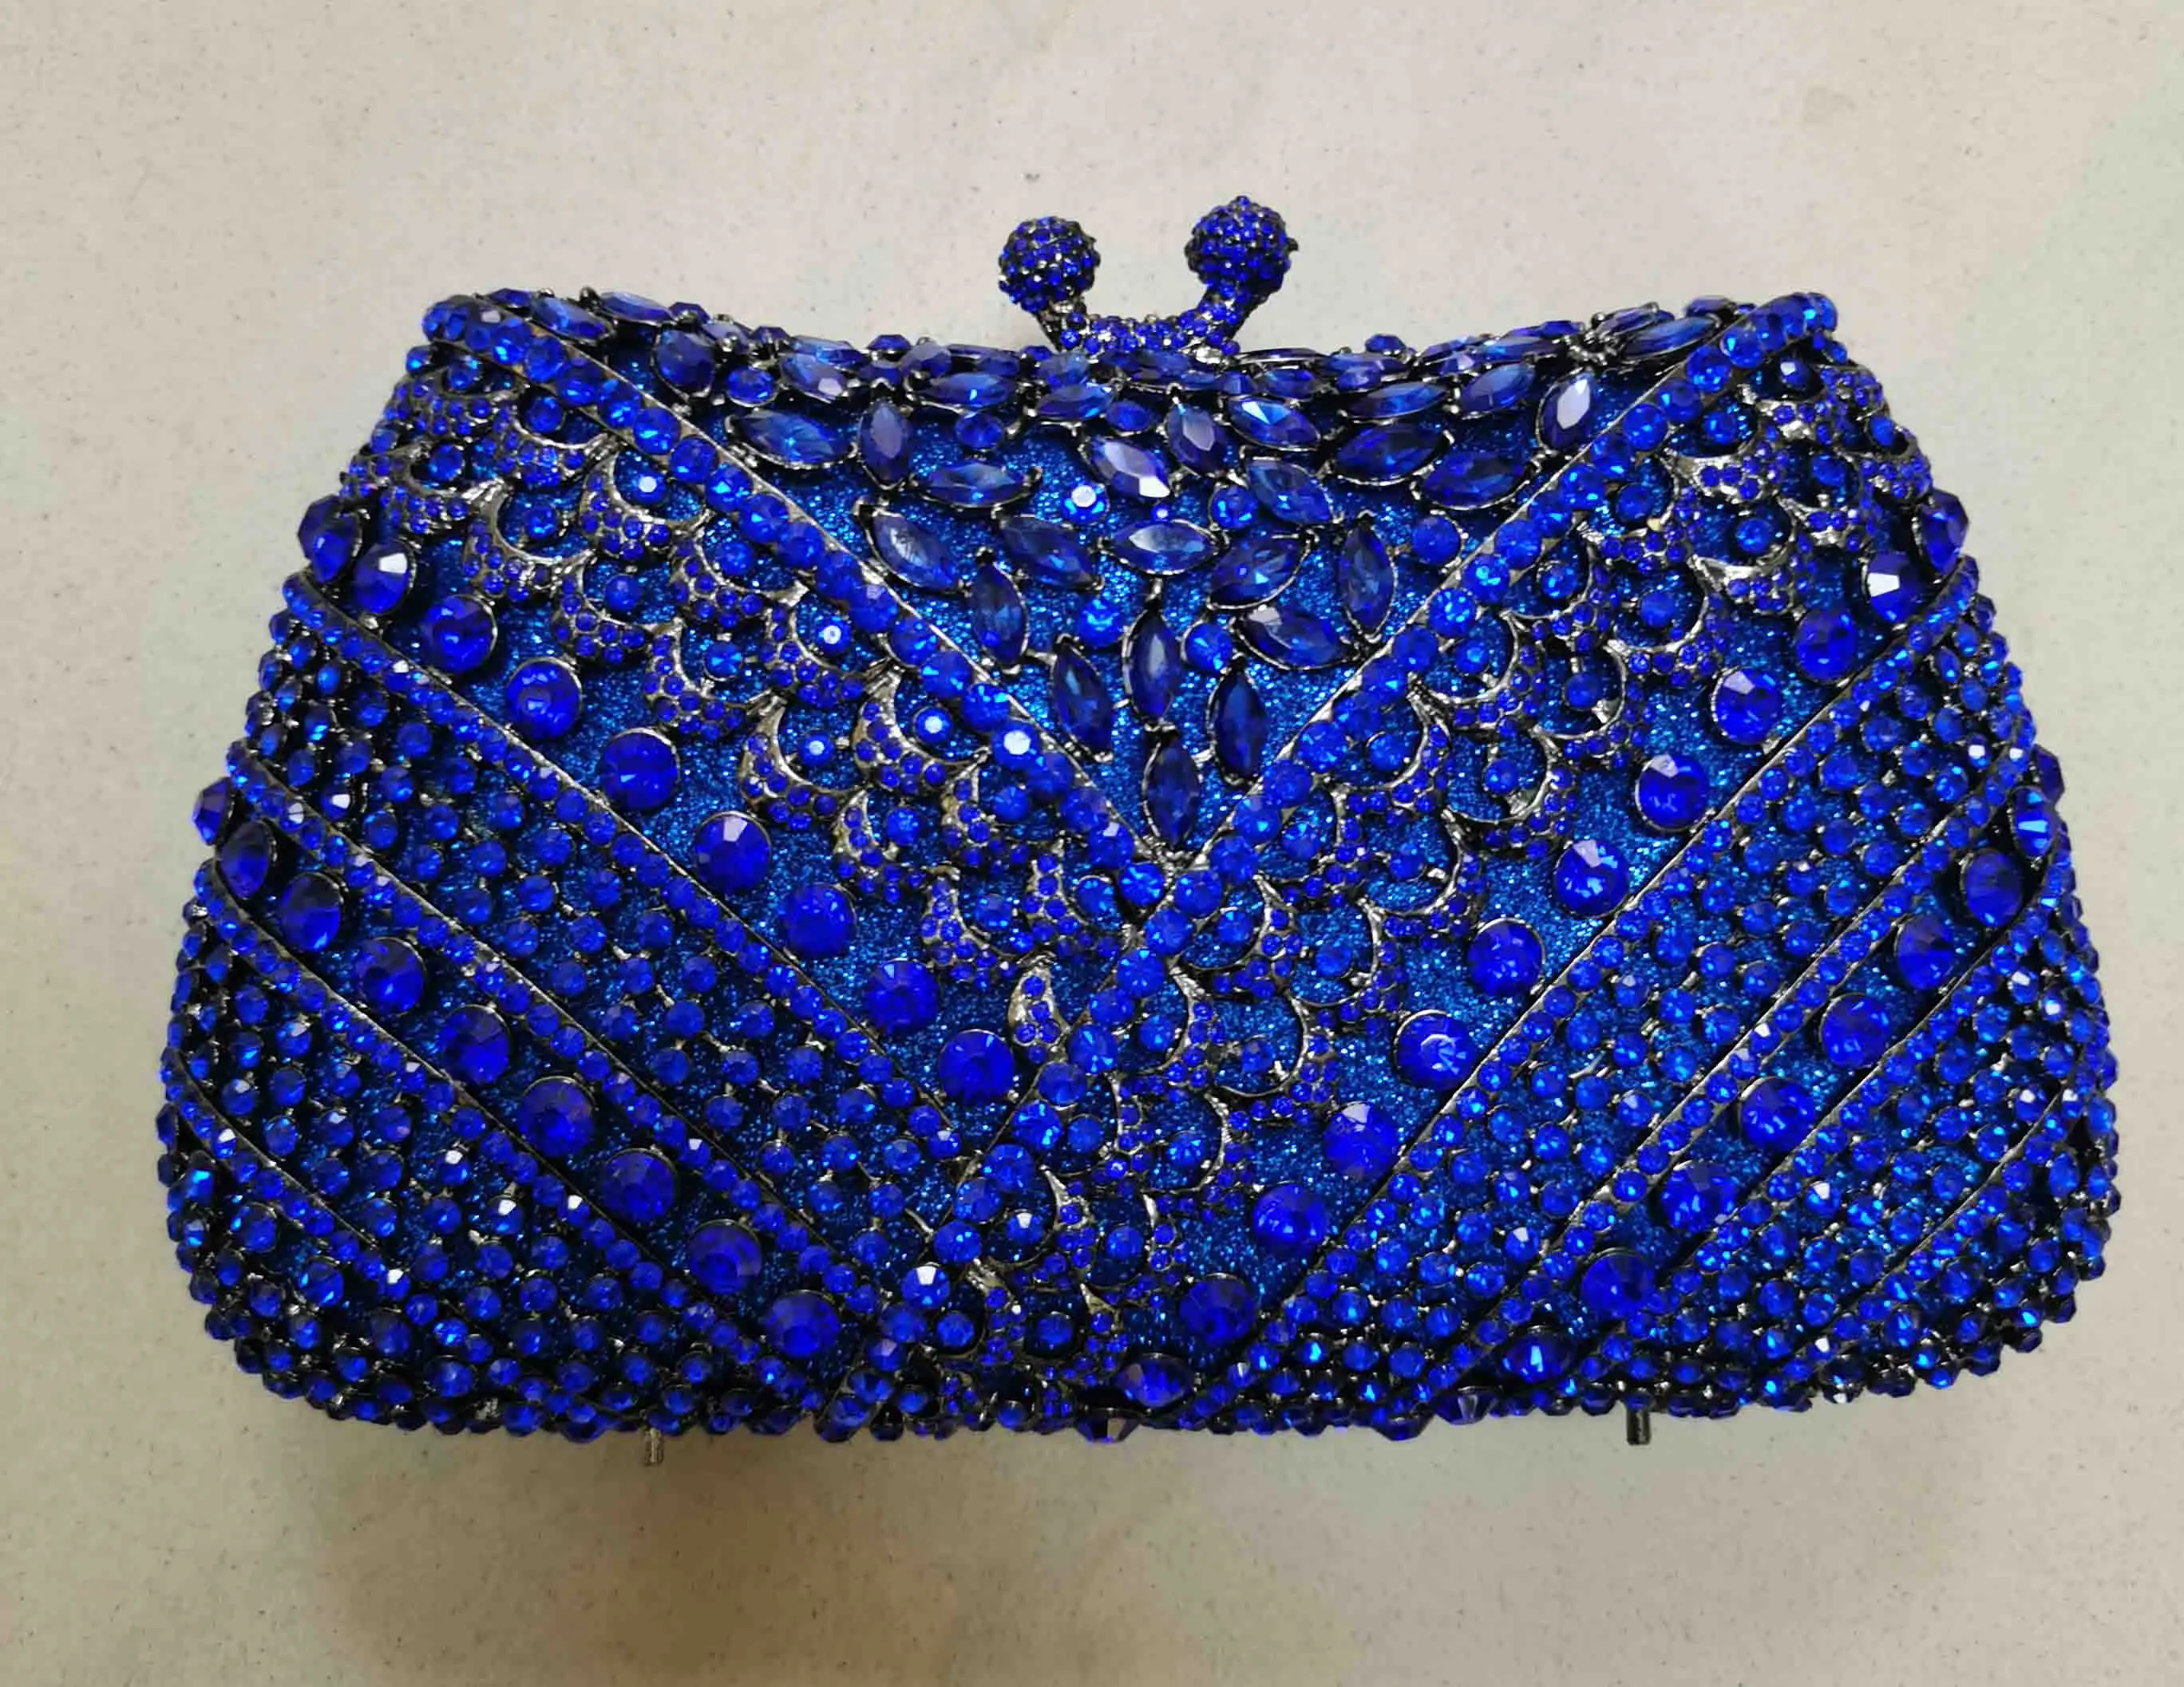 Ladies Purse Black - Ladies Purse Black buyers, suppliers, importers,  exporters and manufacturers - Latest price and trends